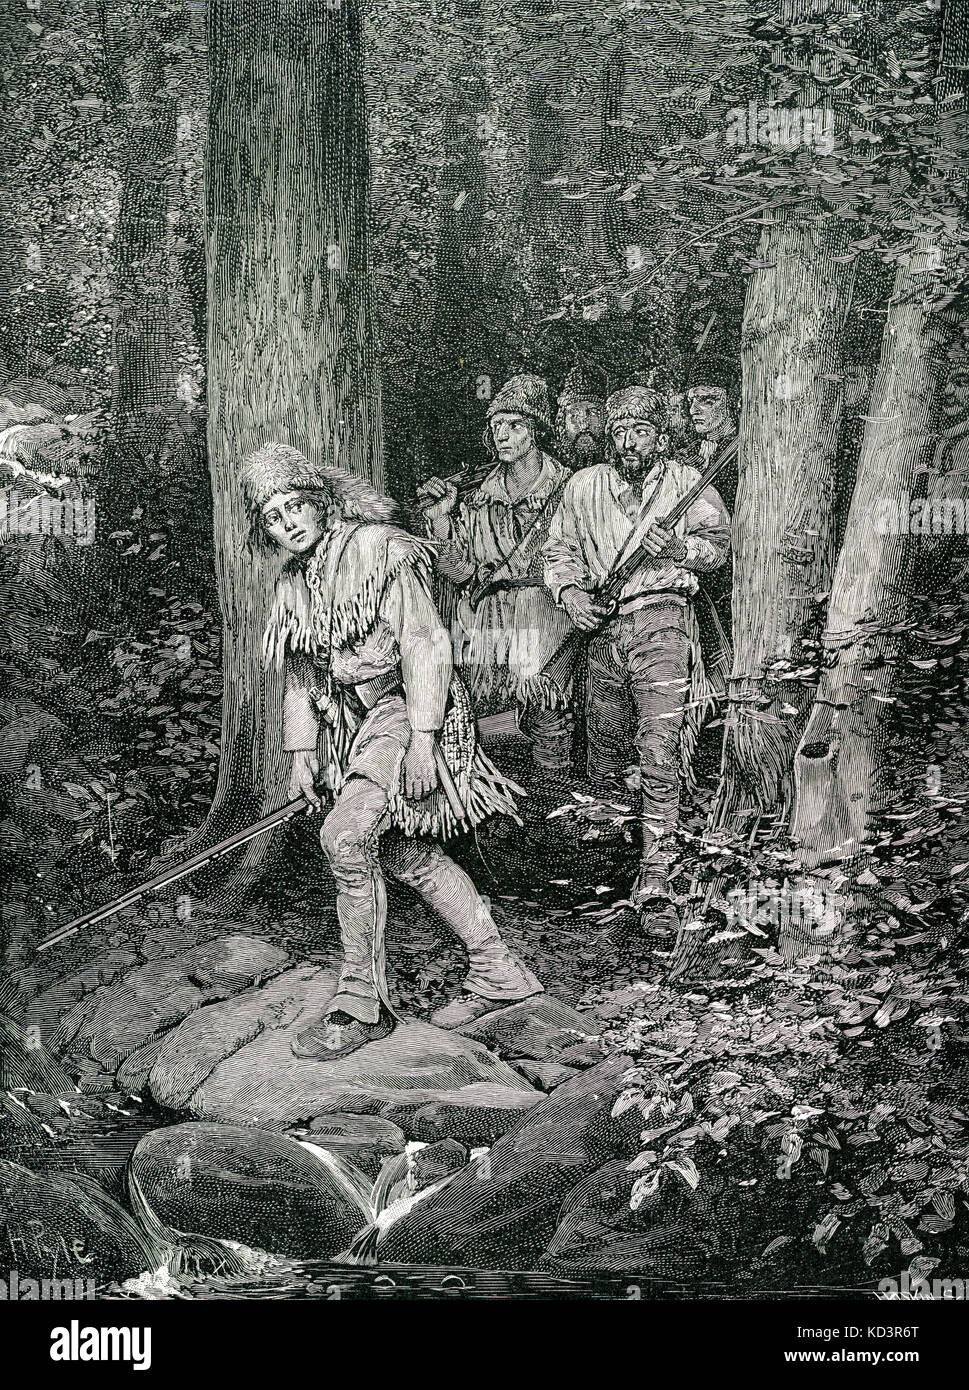 Joseph Brown leads a siege party to Nickajack. Son of Colonel James Brown who had been captured by a Chickamaugan raiding party is hired to lead an expedition back to their camp by the Mero District militia in 1794. Illustration by Howard Pyle, 1887 Stock Photo